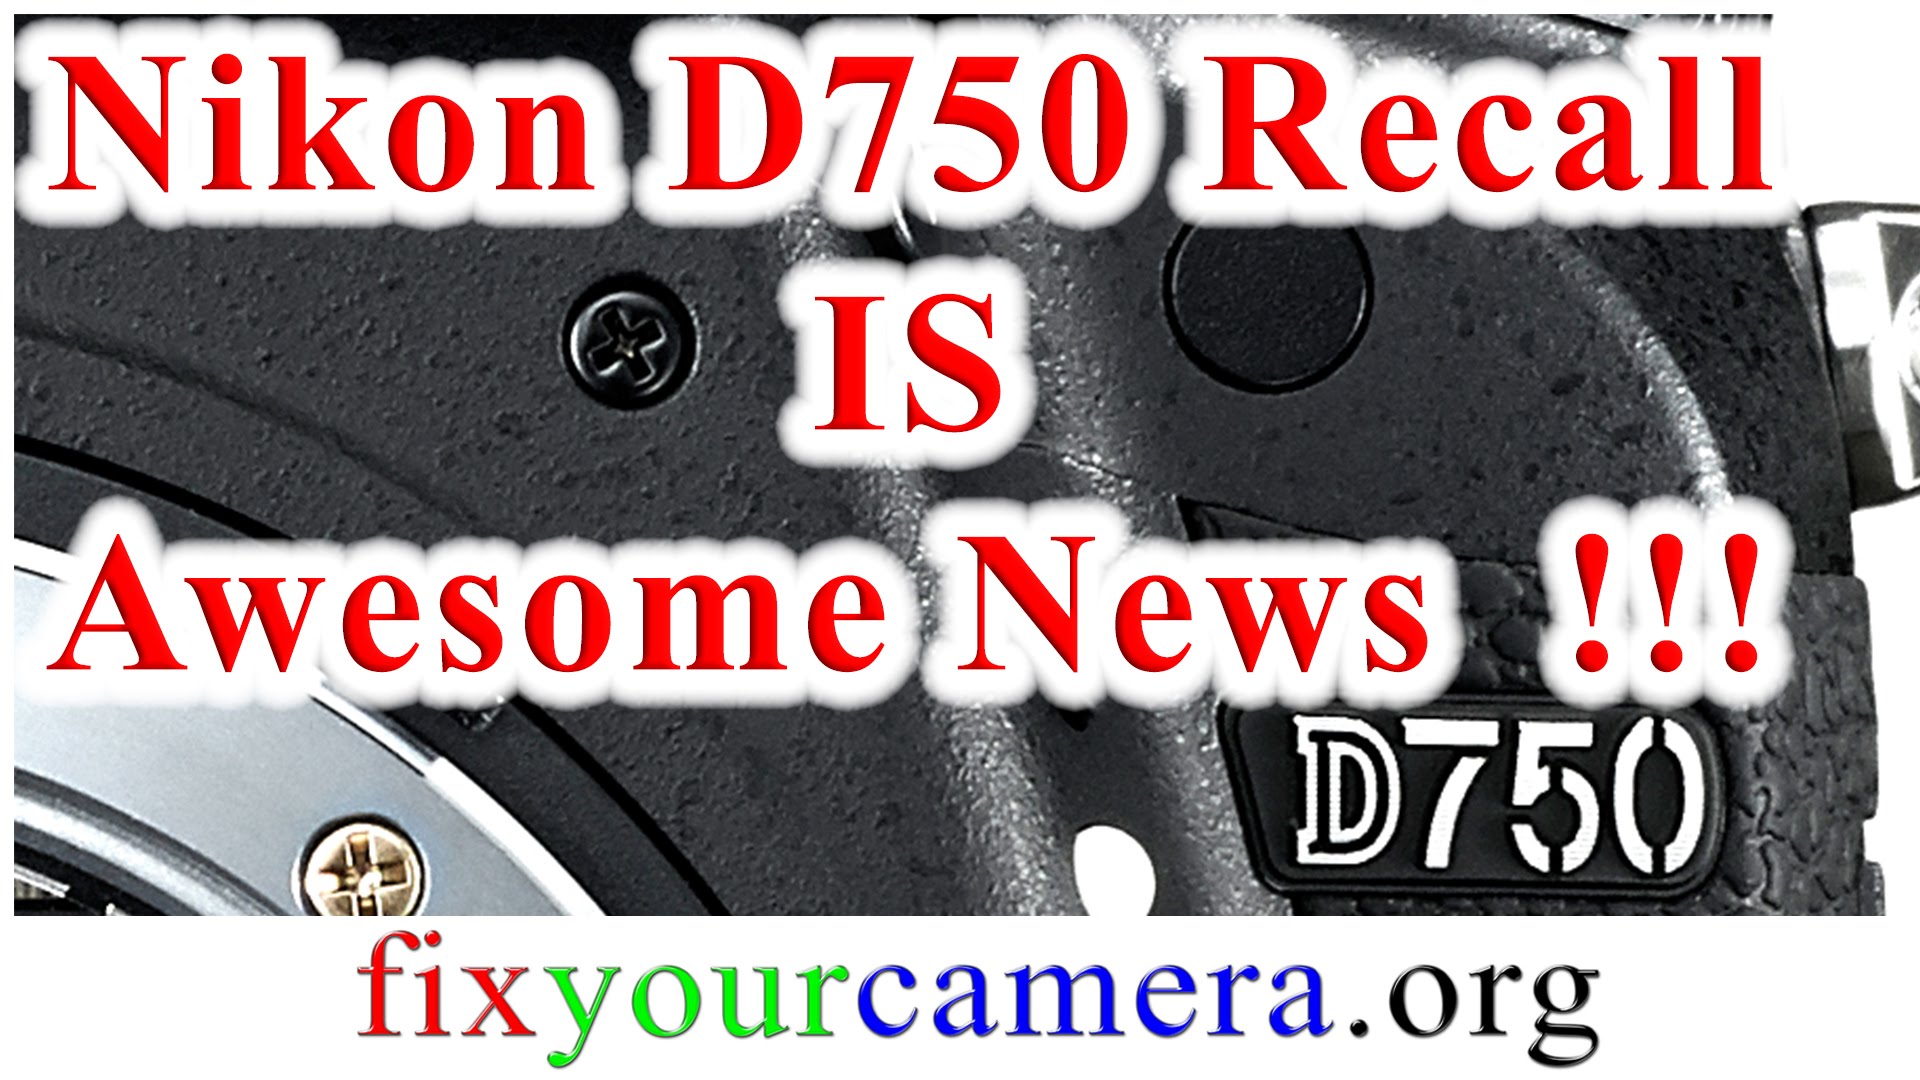 Nikon D750 recall service advisory is awesome news! Camera repair tech point of view and how to…